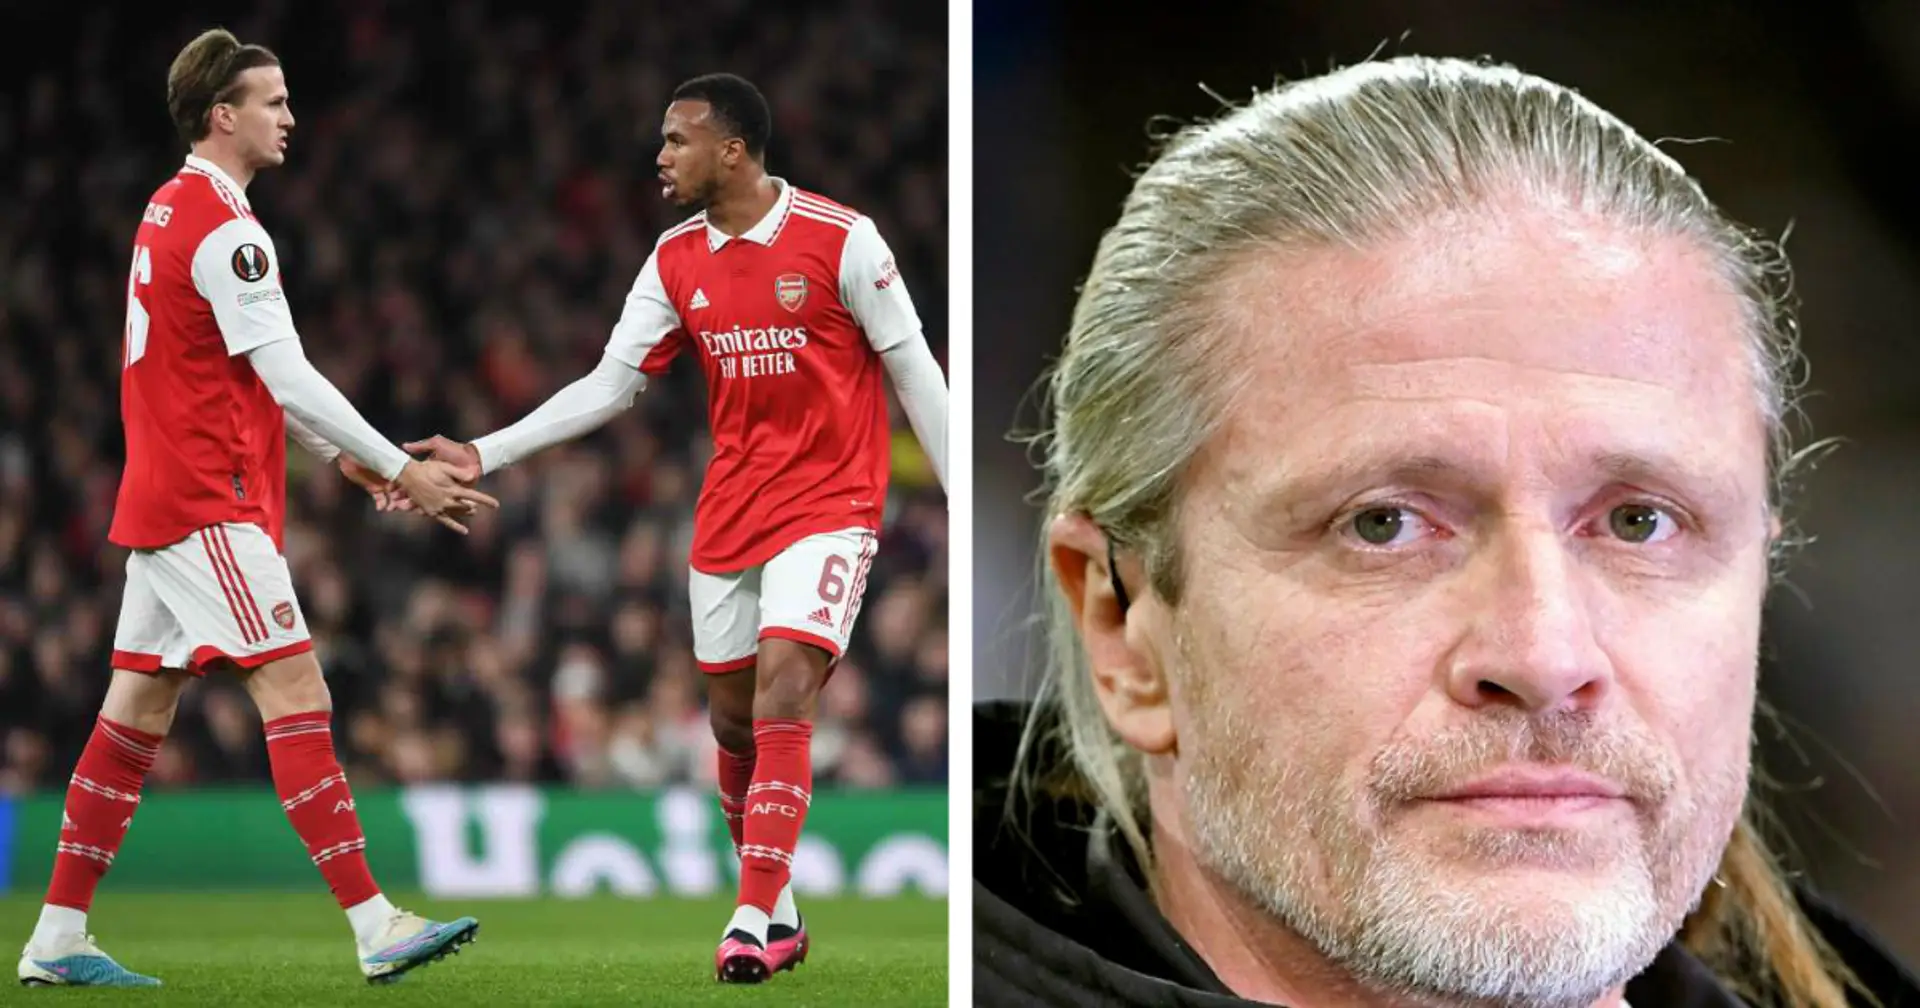 'He is too soft, as a defender': Emmanuel Petit slams Arsenal player